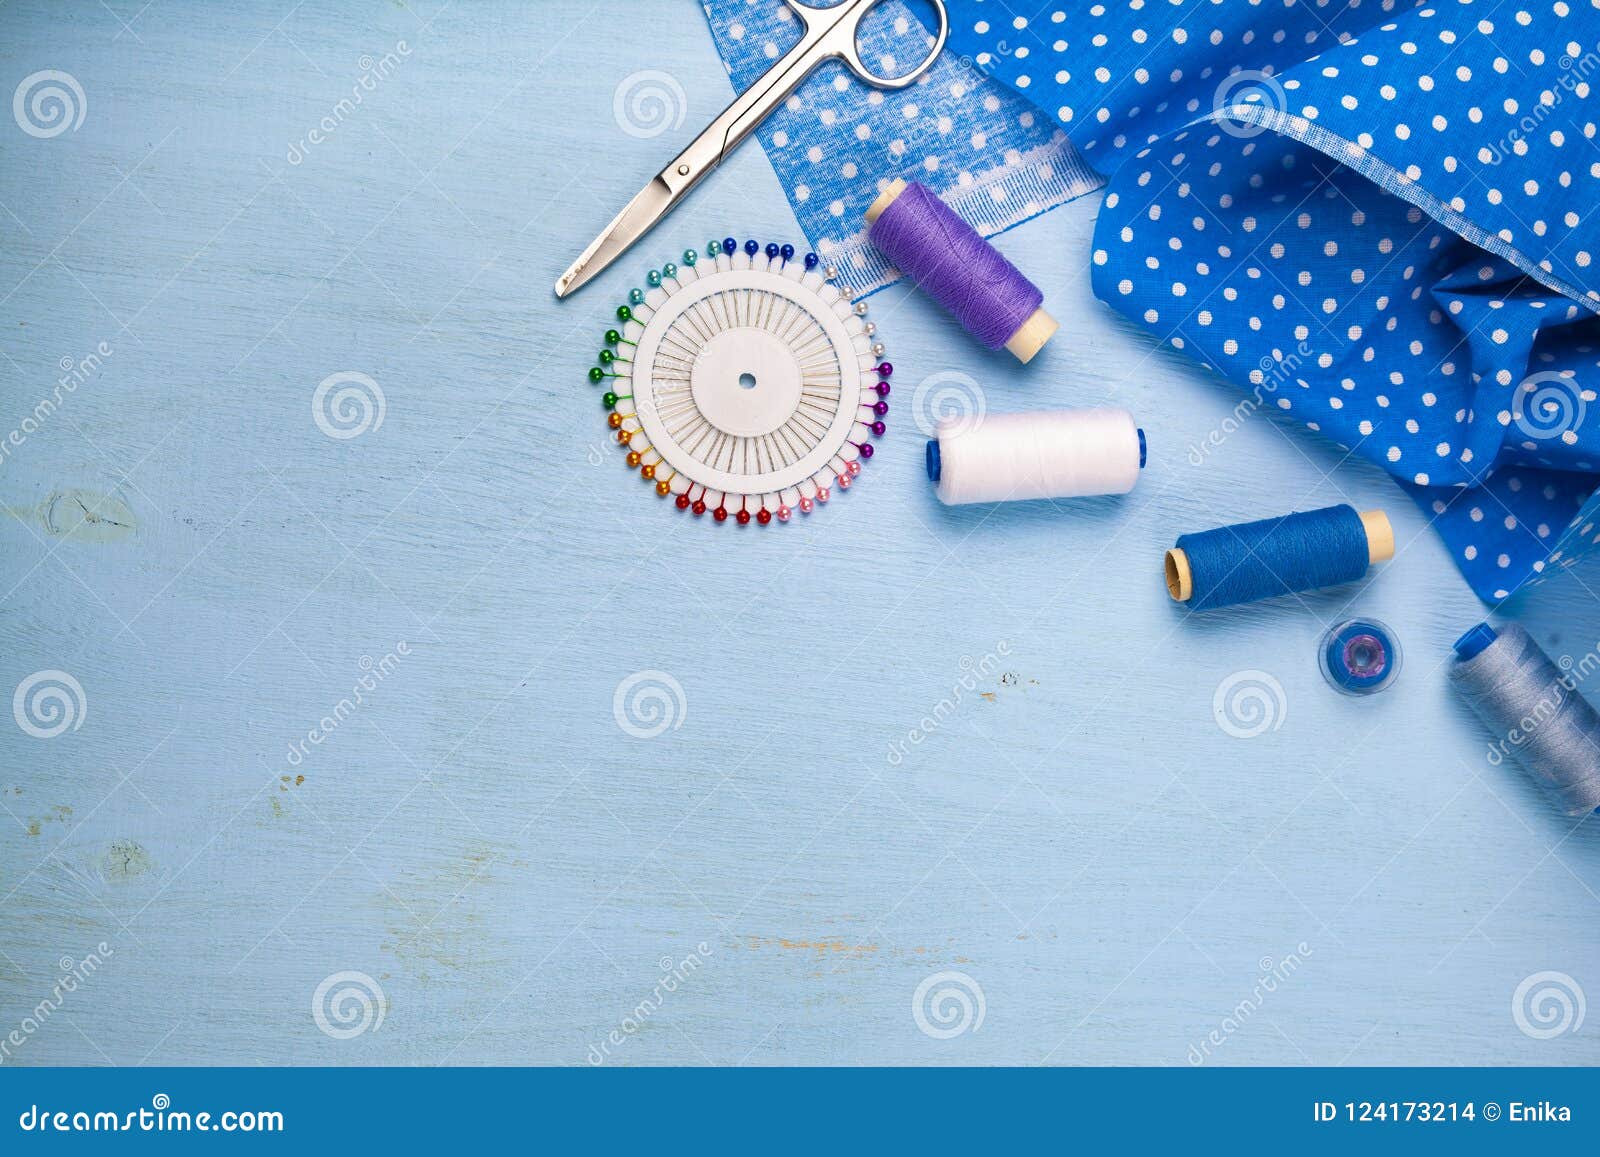 Sewing Accessories on a Blue Background Stock Photo - Image of ...